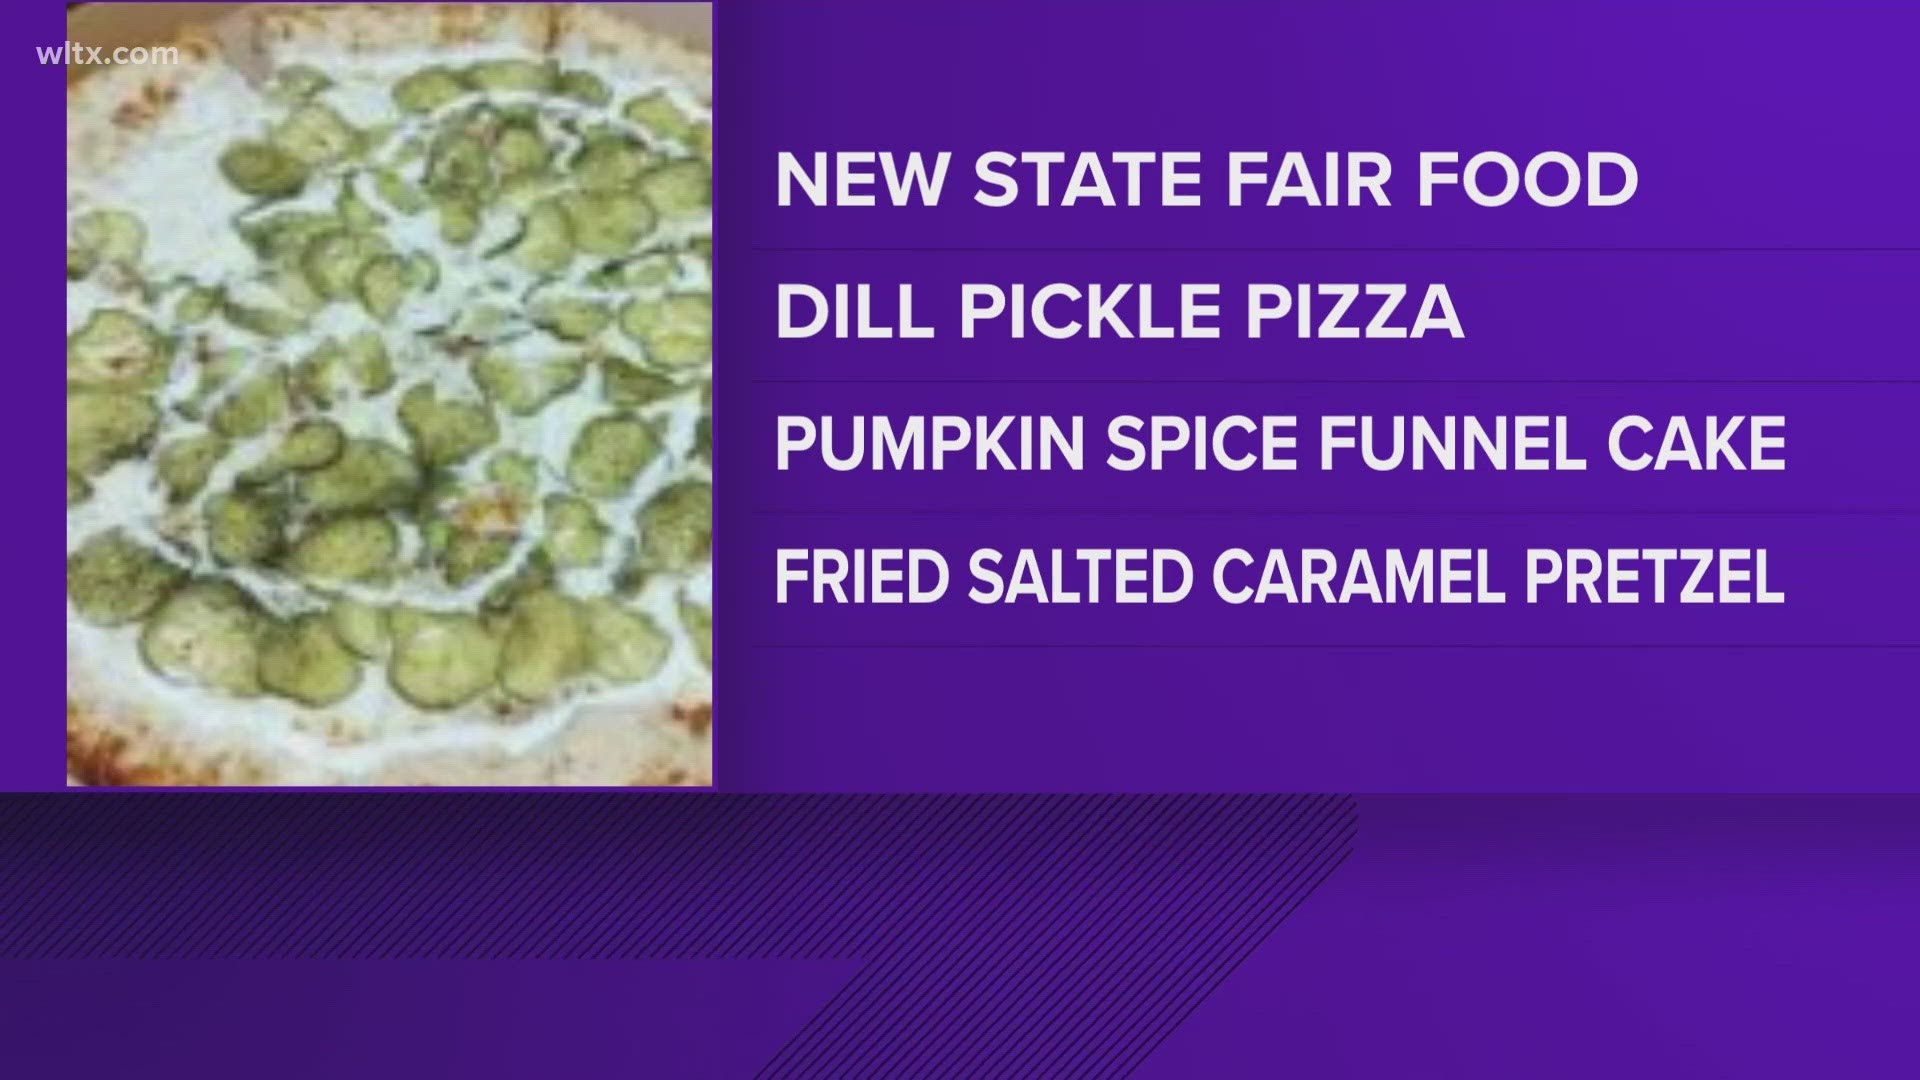 Donut dogs, pumpkin spice funnel cakes and even a dill pickle pizza.